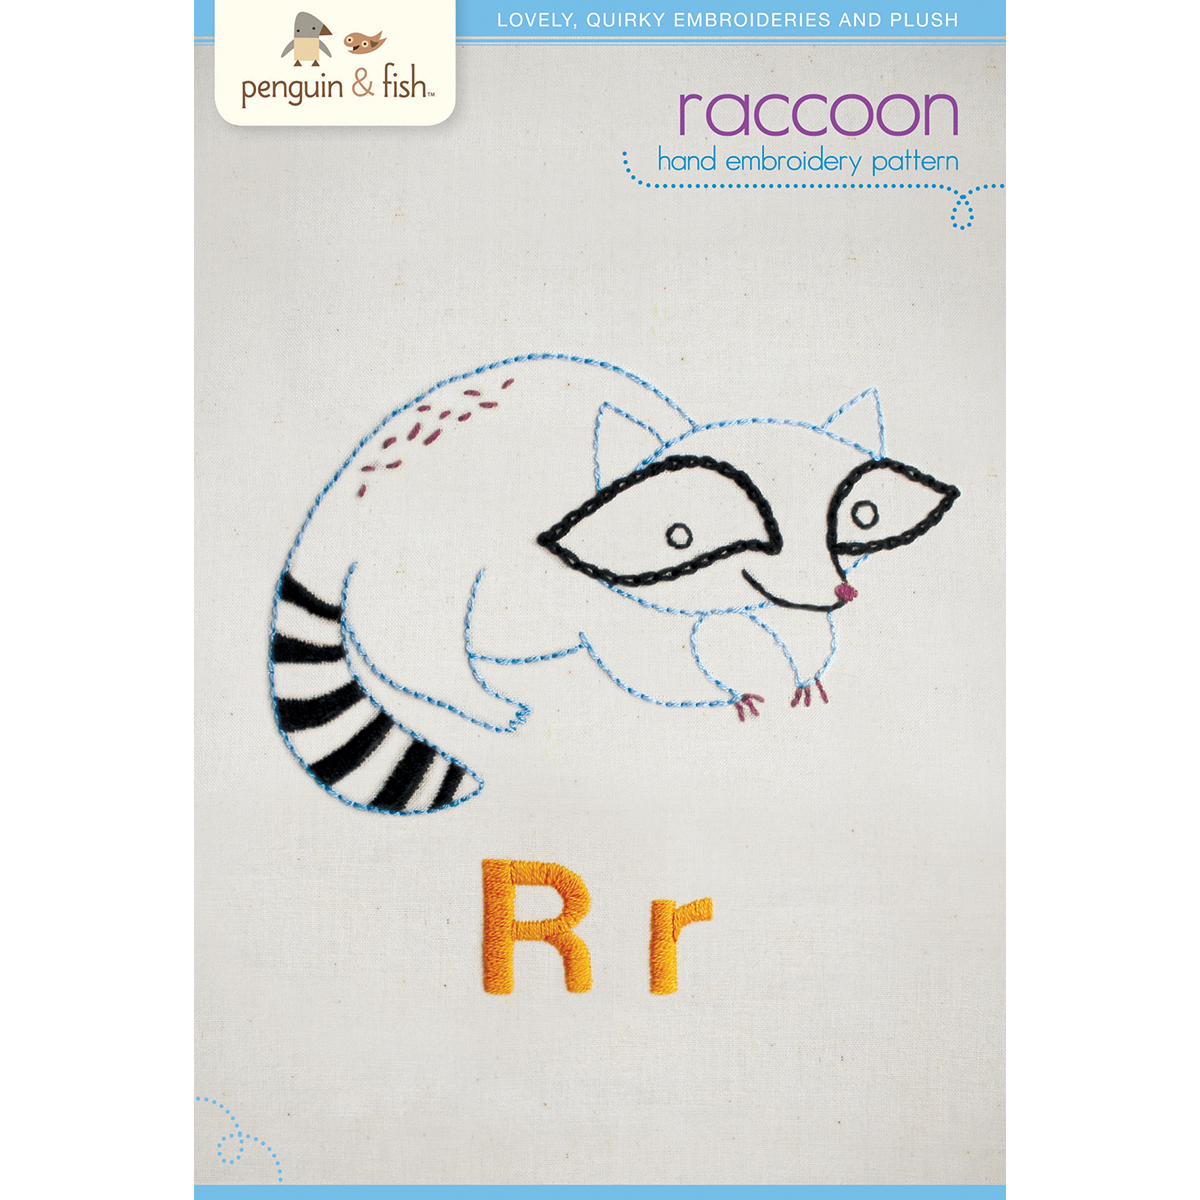 Fish Embroidery Patterns Penguin Fish Embroidery Patterns Raccoon